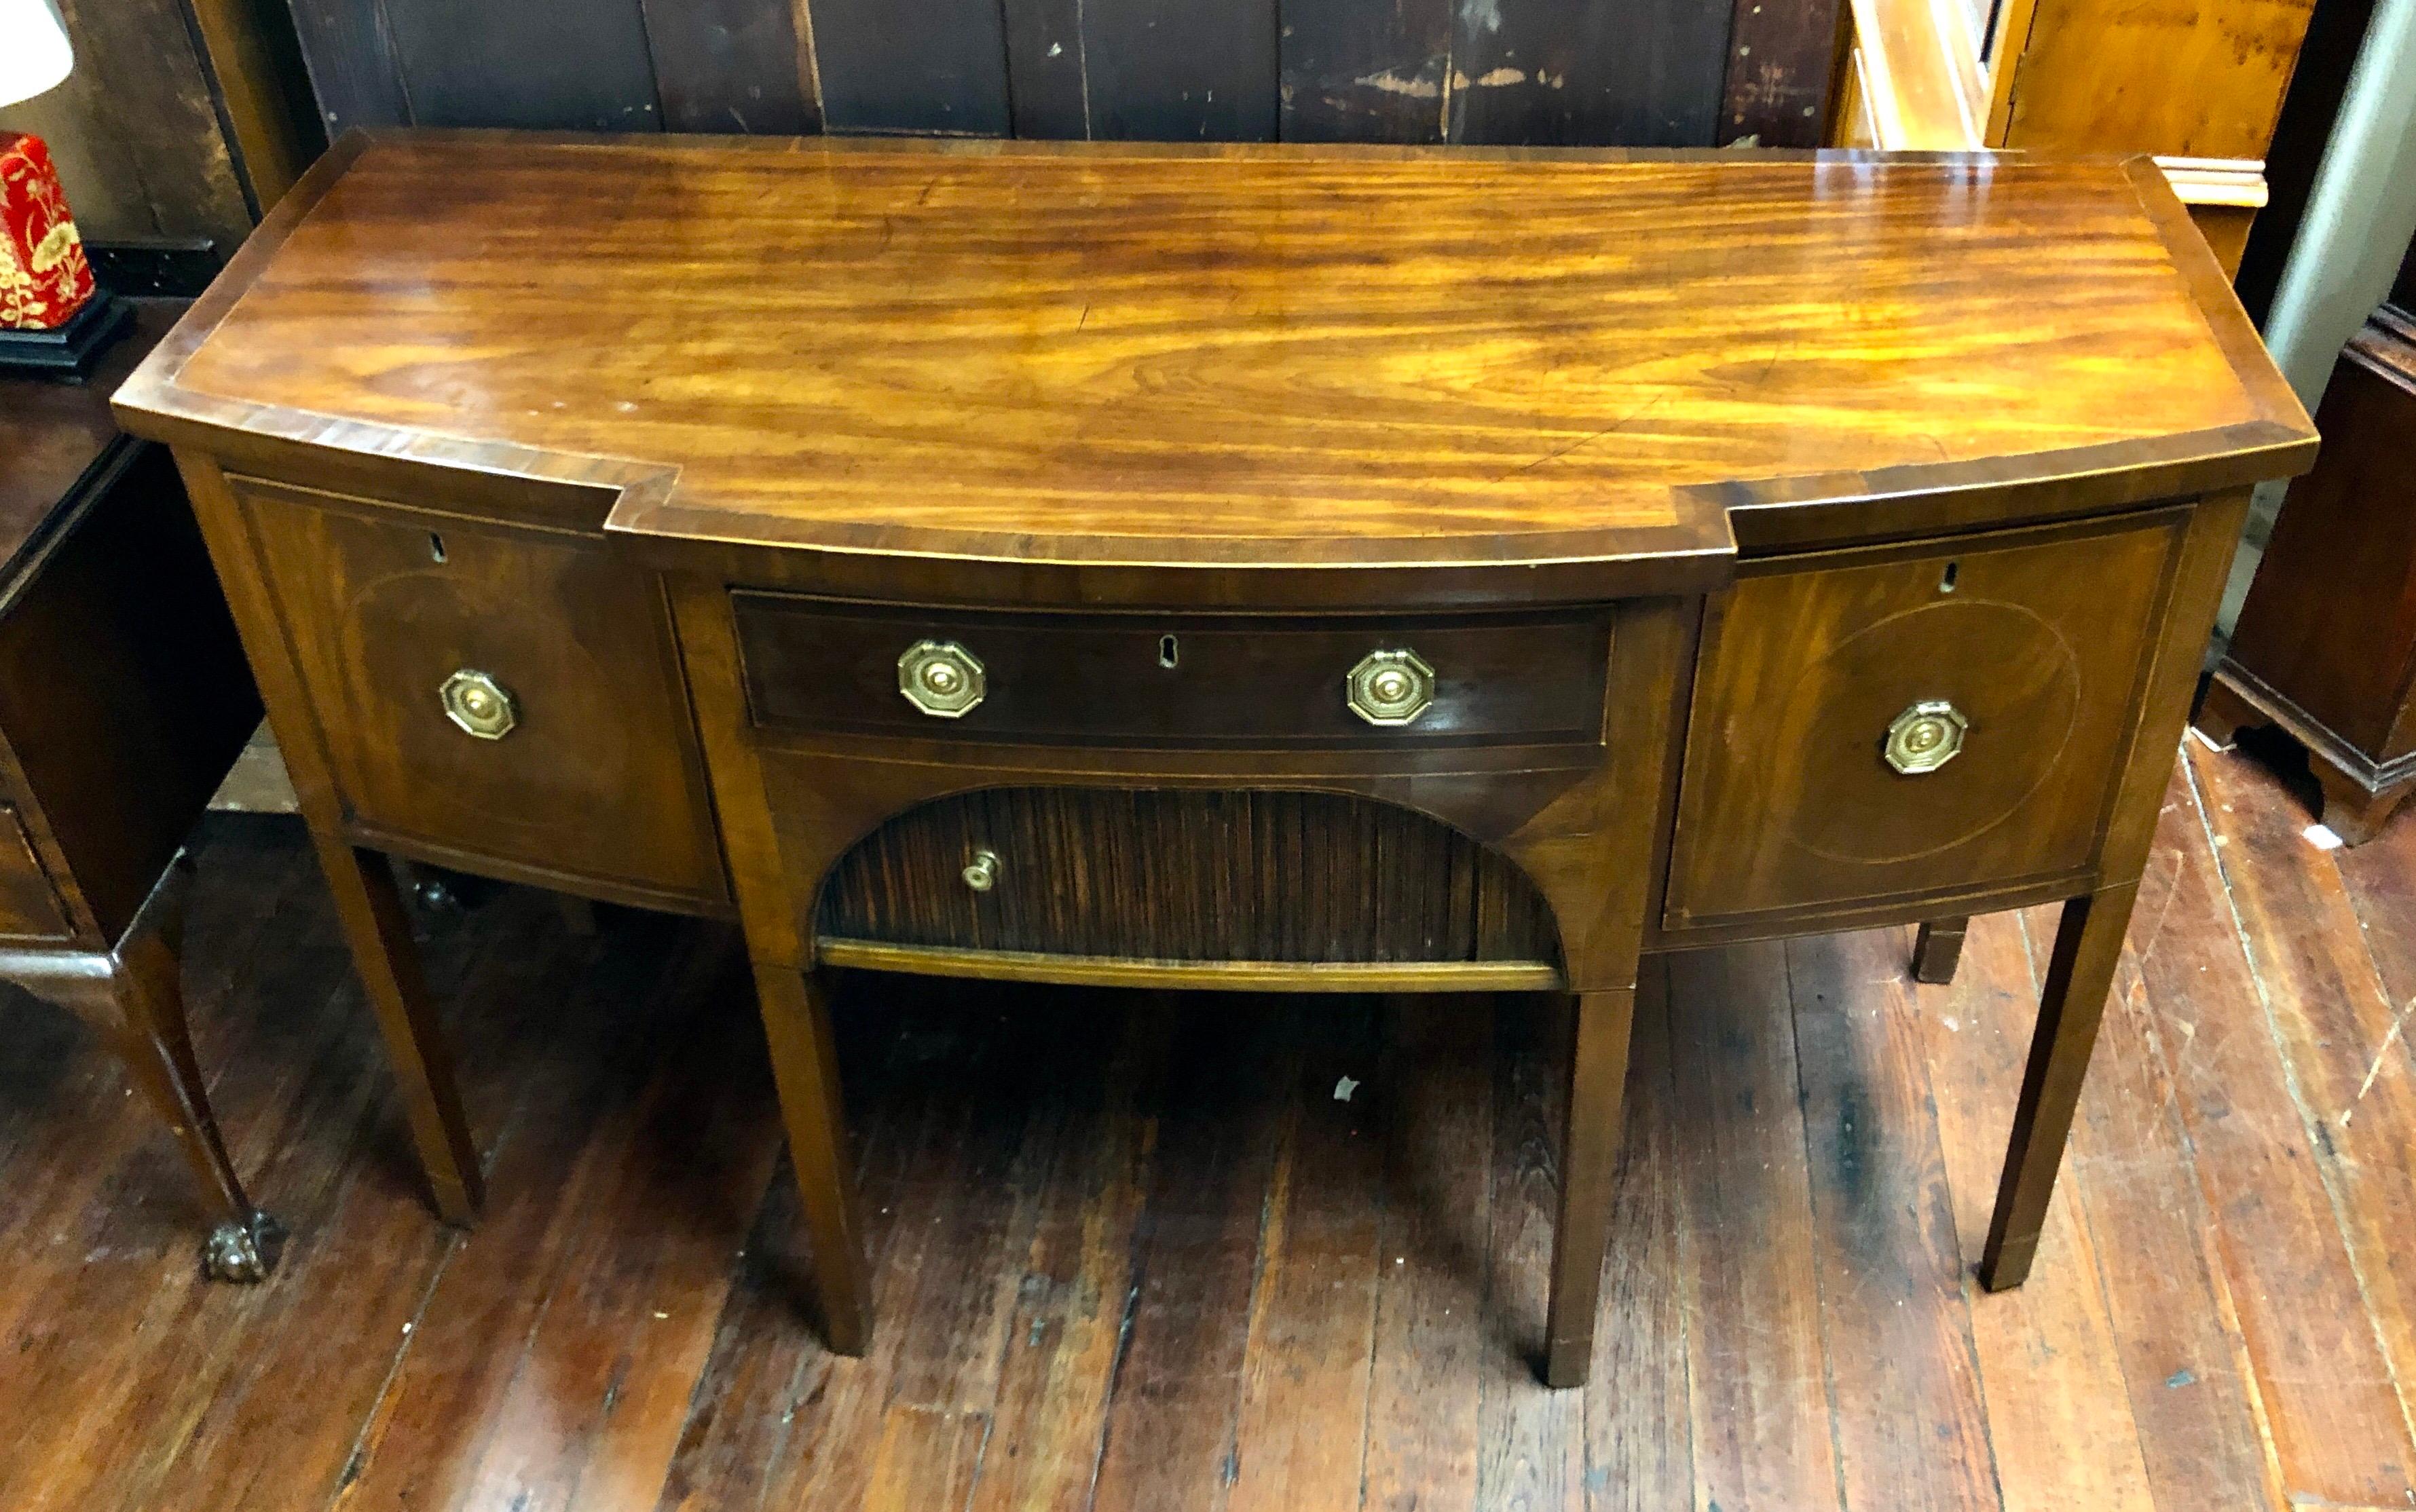 A wonderful, rare period Geo. III late 18th/early 19th century inlaid mahogany sideboard with its original tambour ribbed, sliding cupboard. It has a central drawer flanked by two deep, cellarette drawers. The brasses are antique and quite fine, but